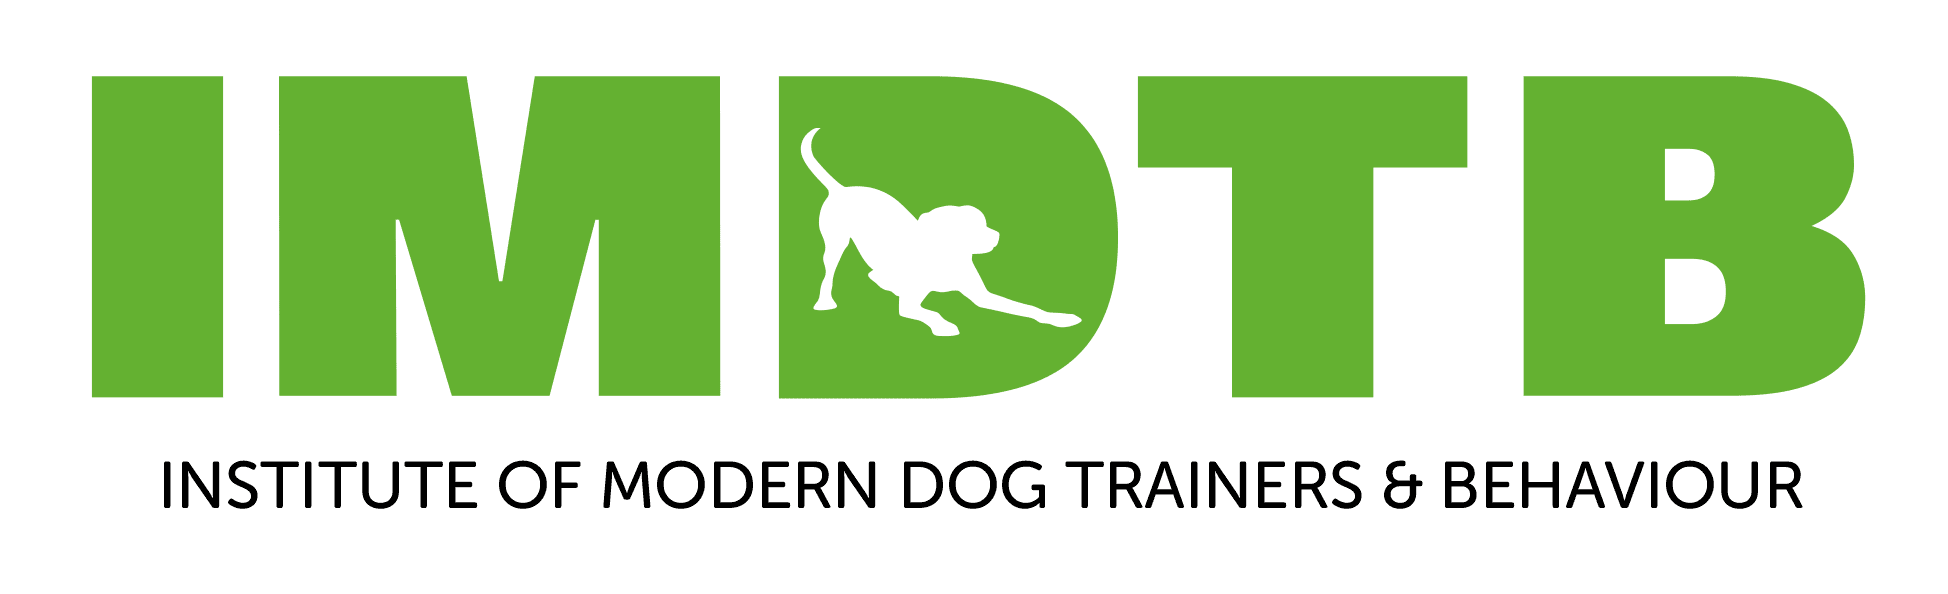 Institute of Modern Dog Trainers and Behaviours IMDTB logo